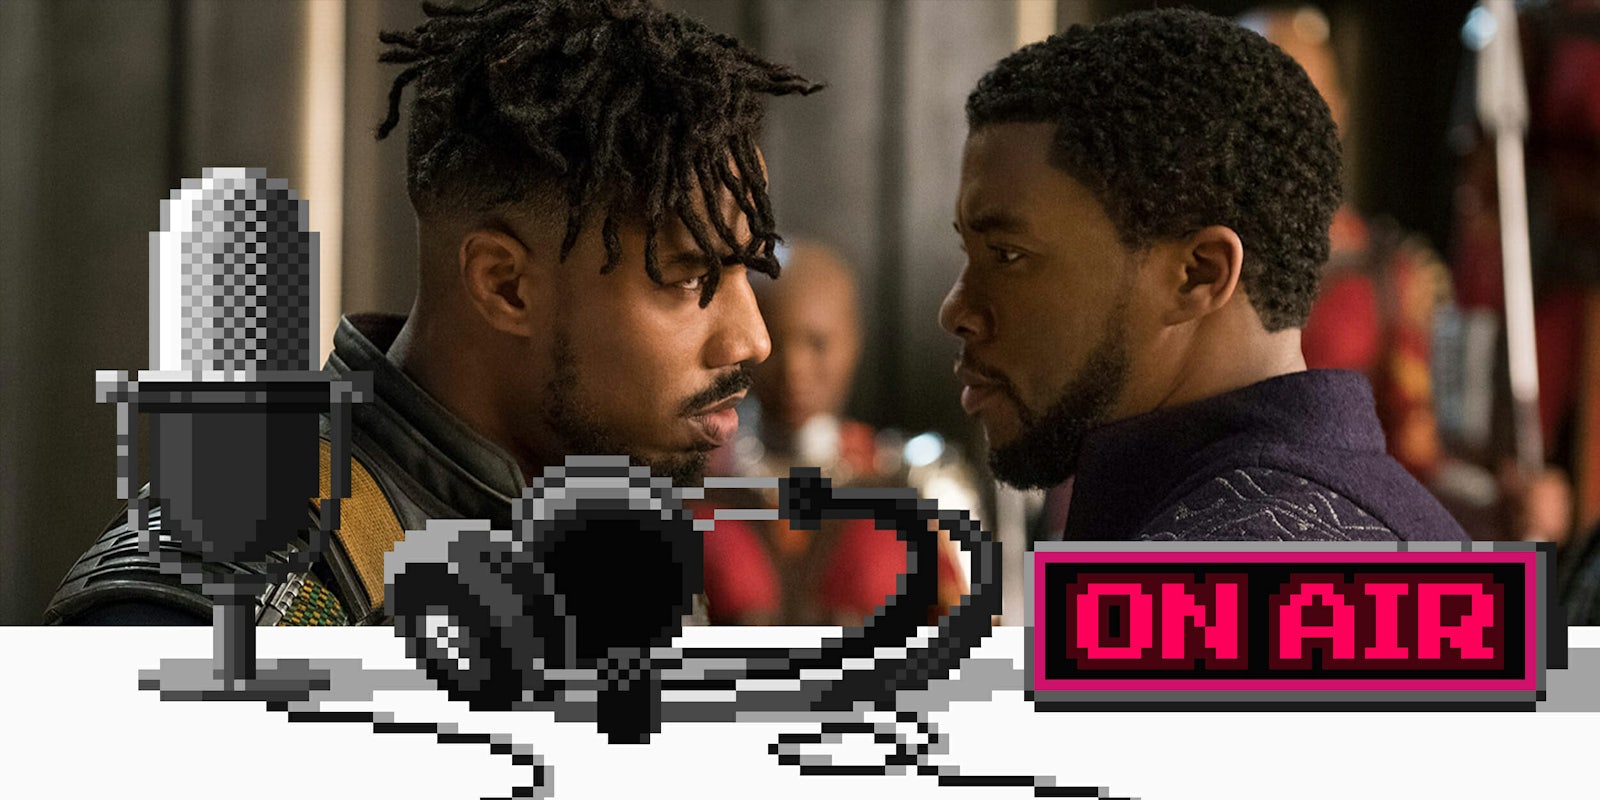 Upstream podcast discusses Black Panther